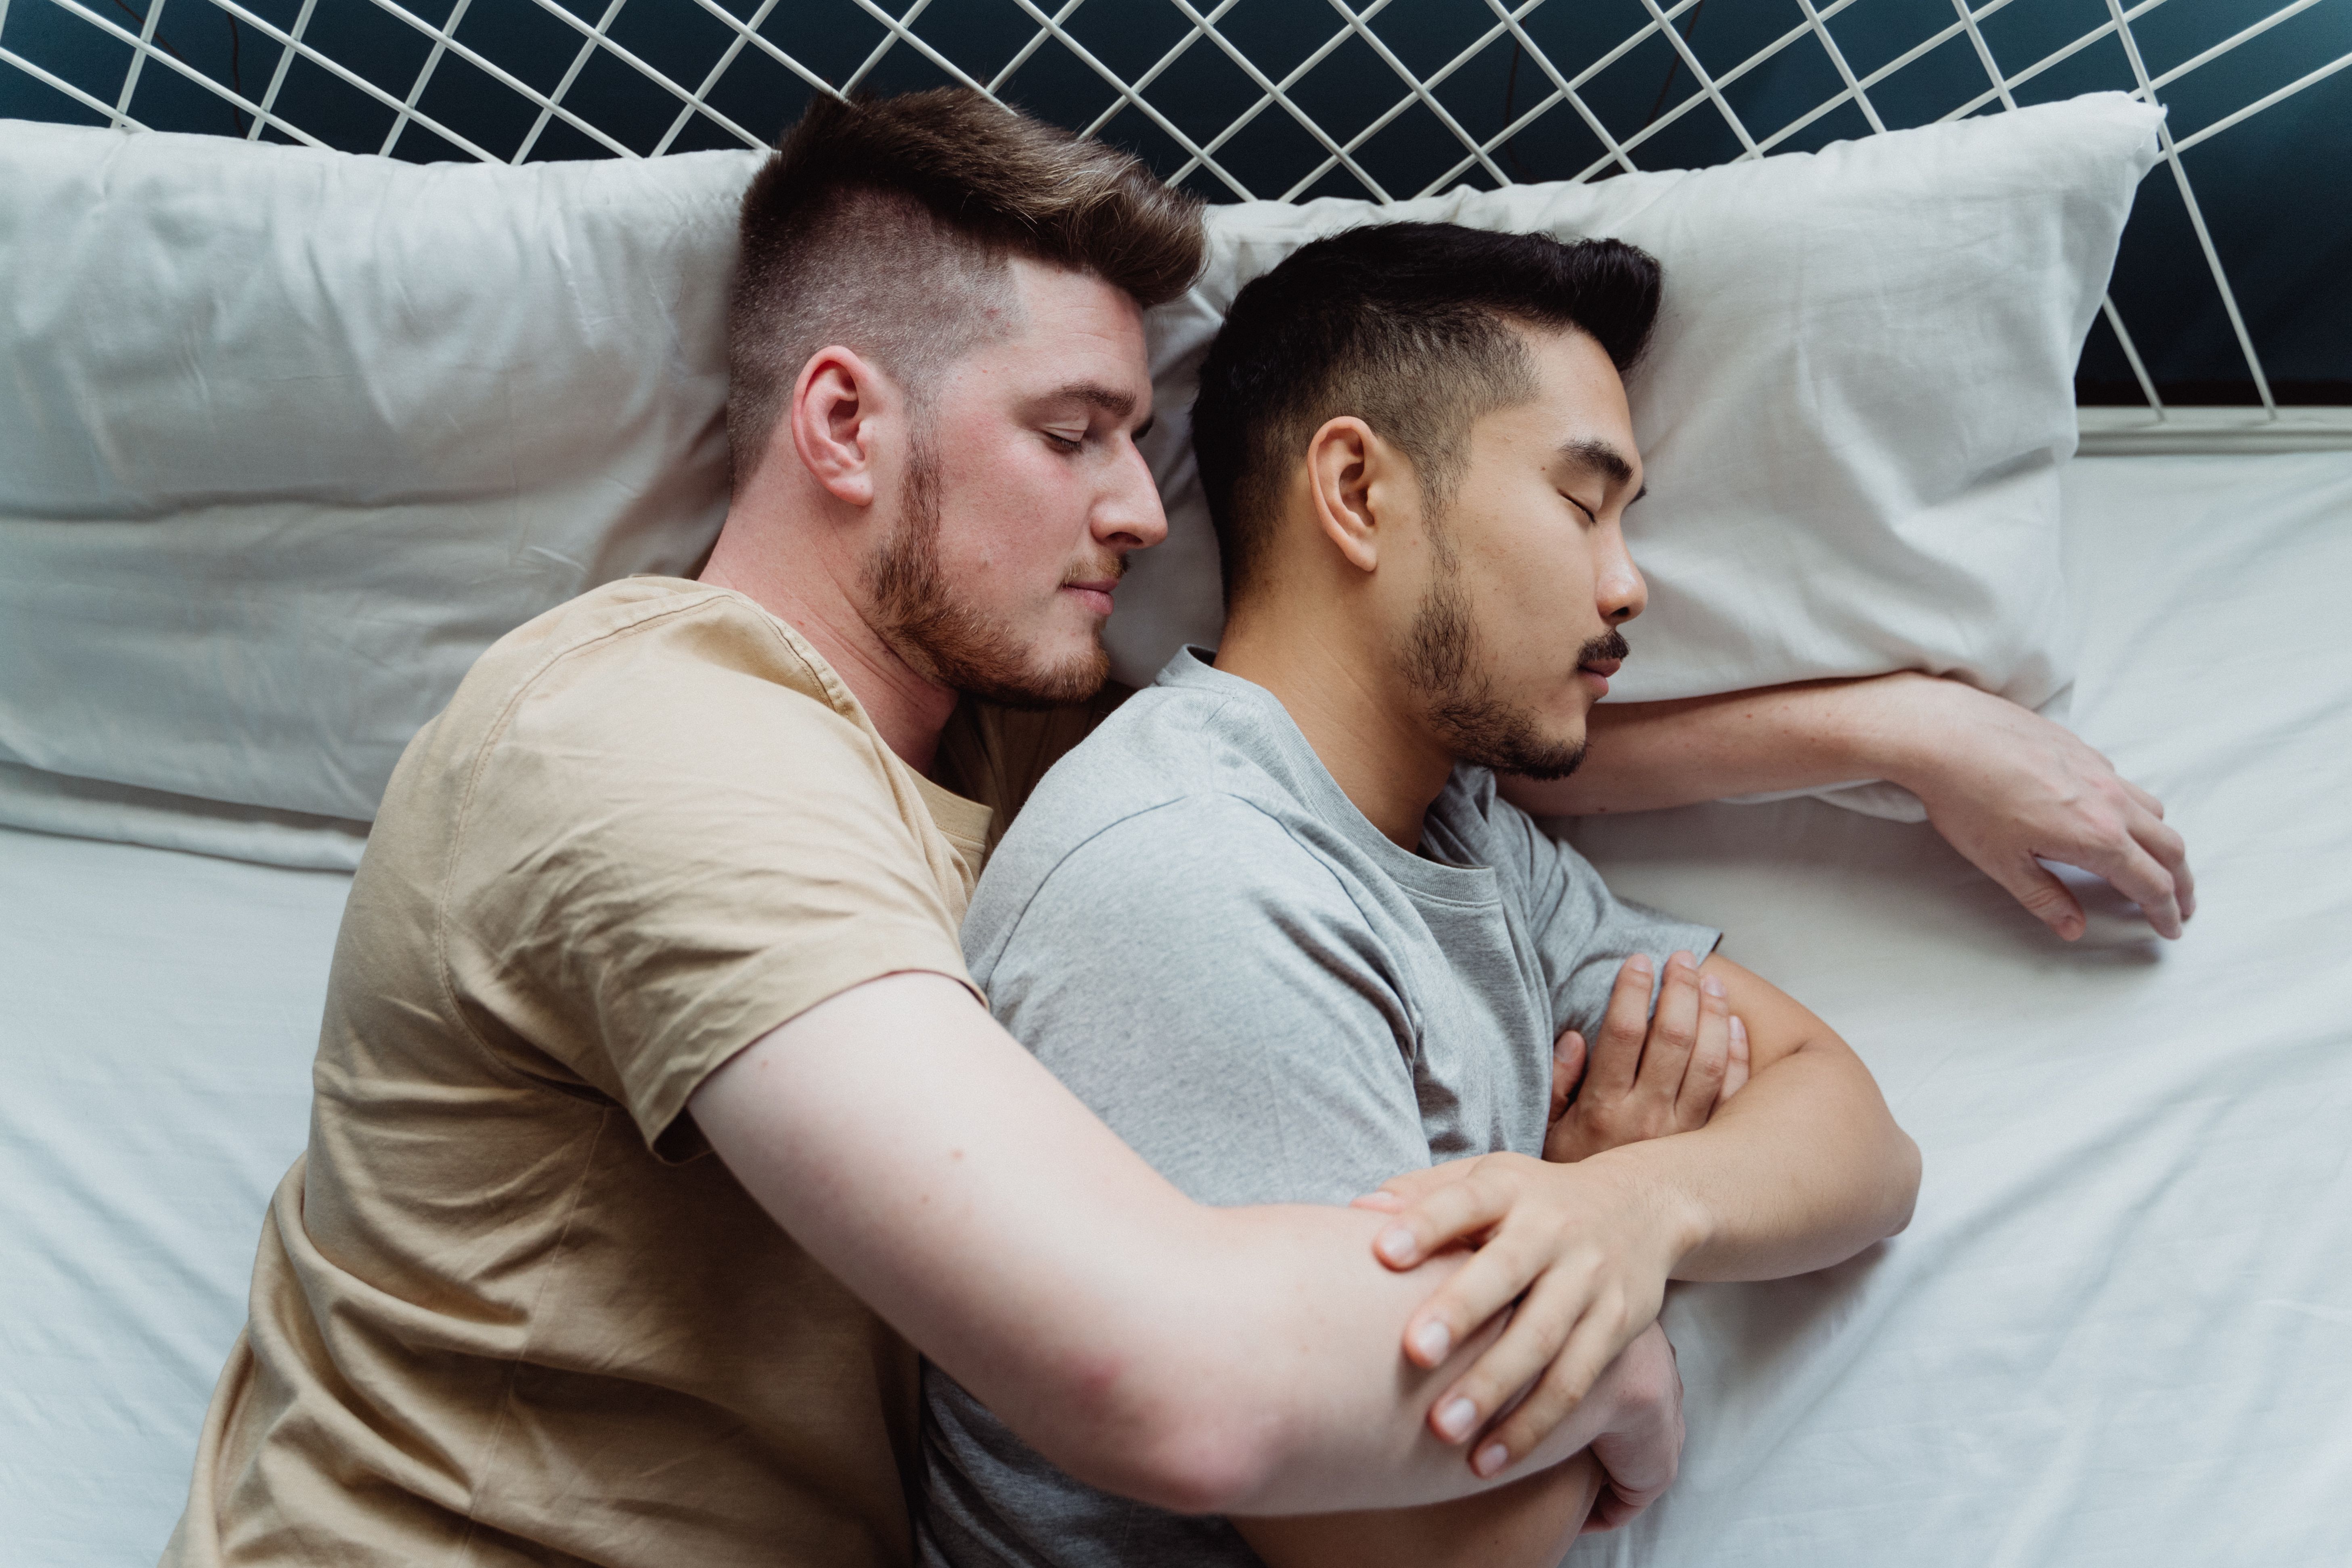 Two Men Sleeping Together · Free